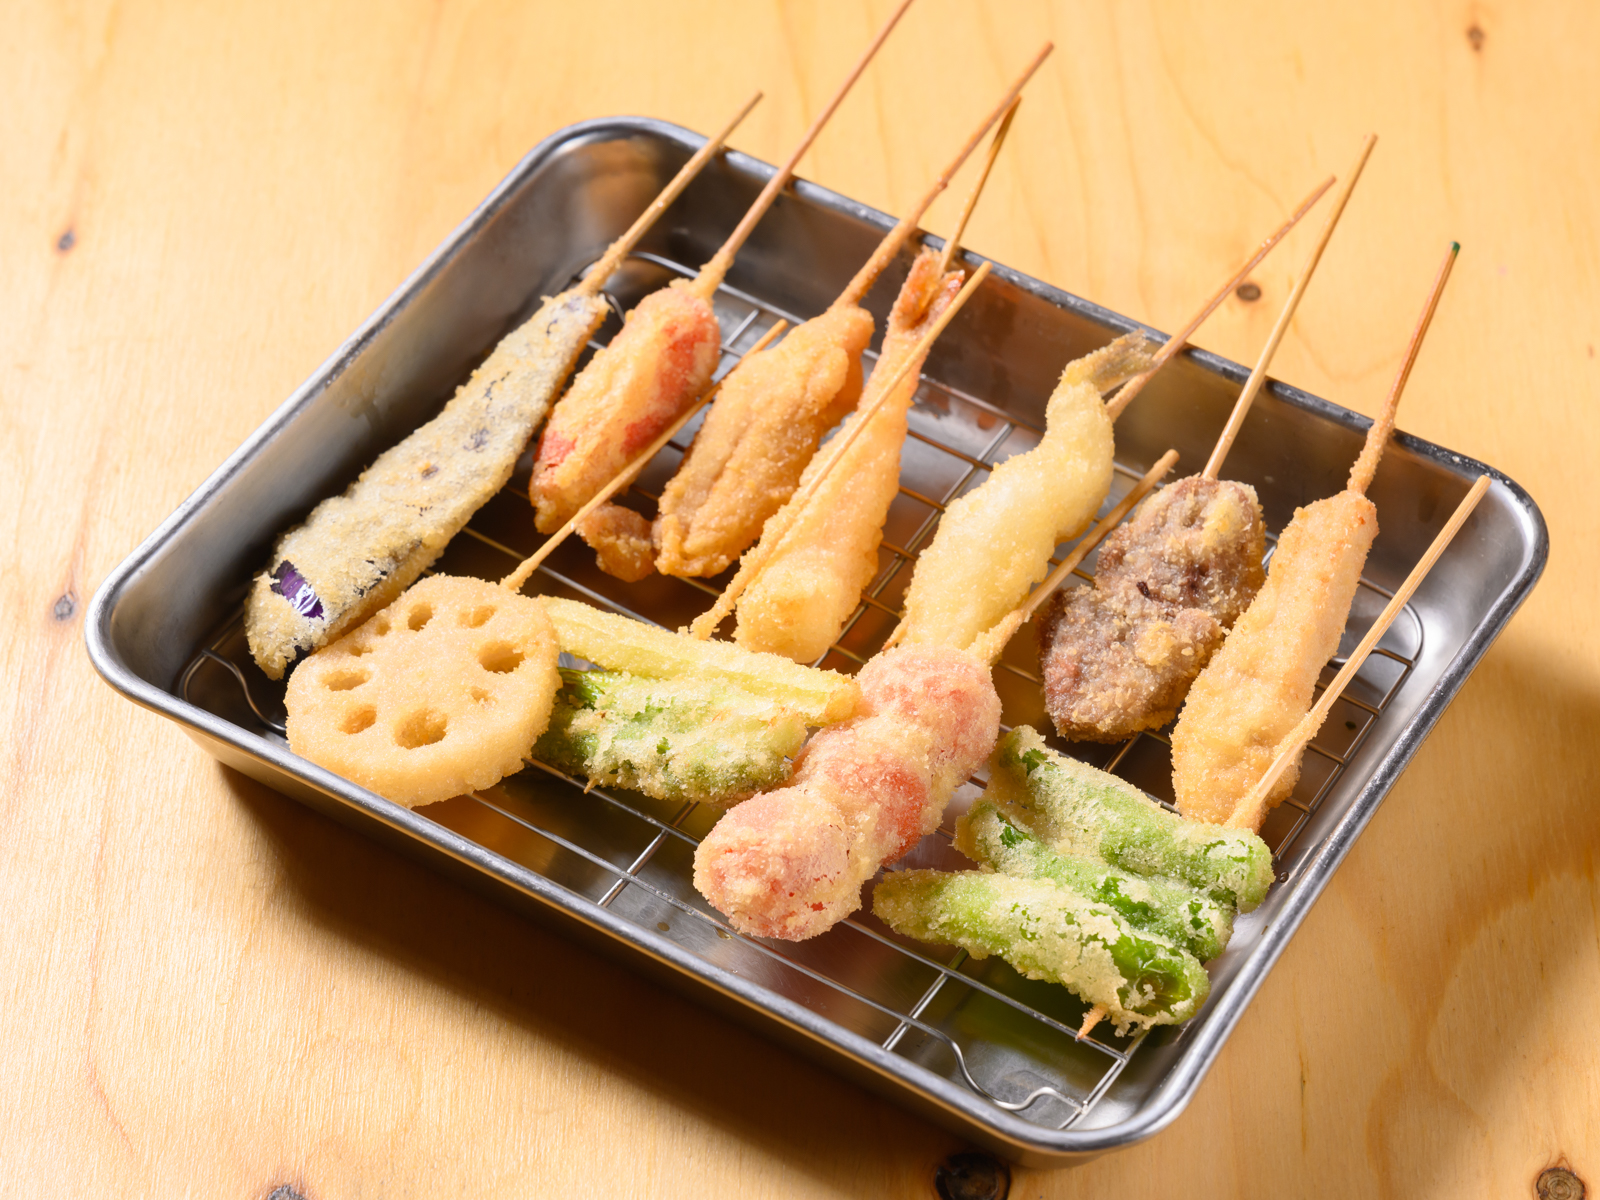 Ebisu Shoten Shin-Sapporo Branch_Kushikatsu Skewers -Taste the flavor of the ingredients with the crispy batter. There are many varieties to enjoy.